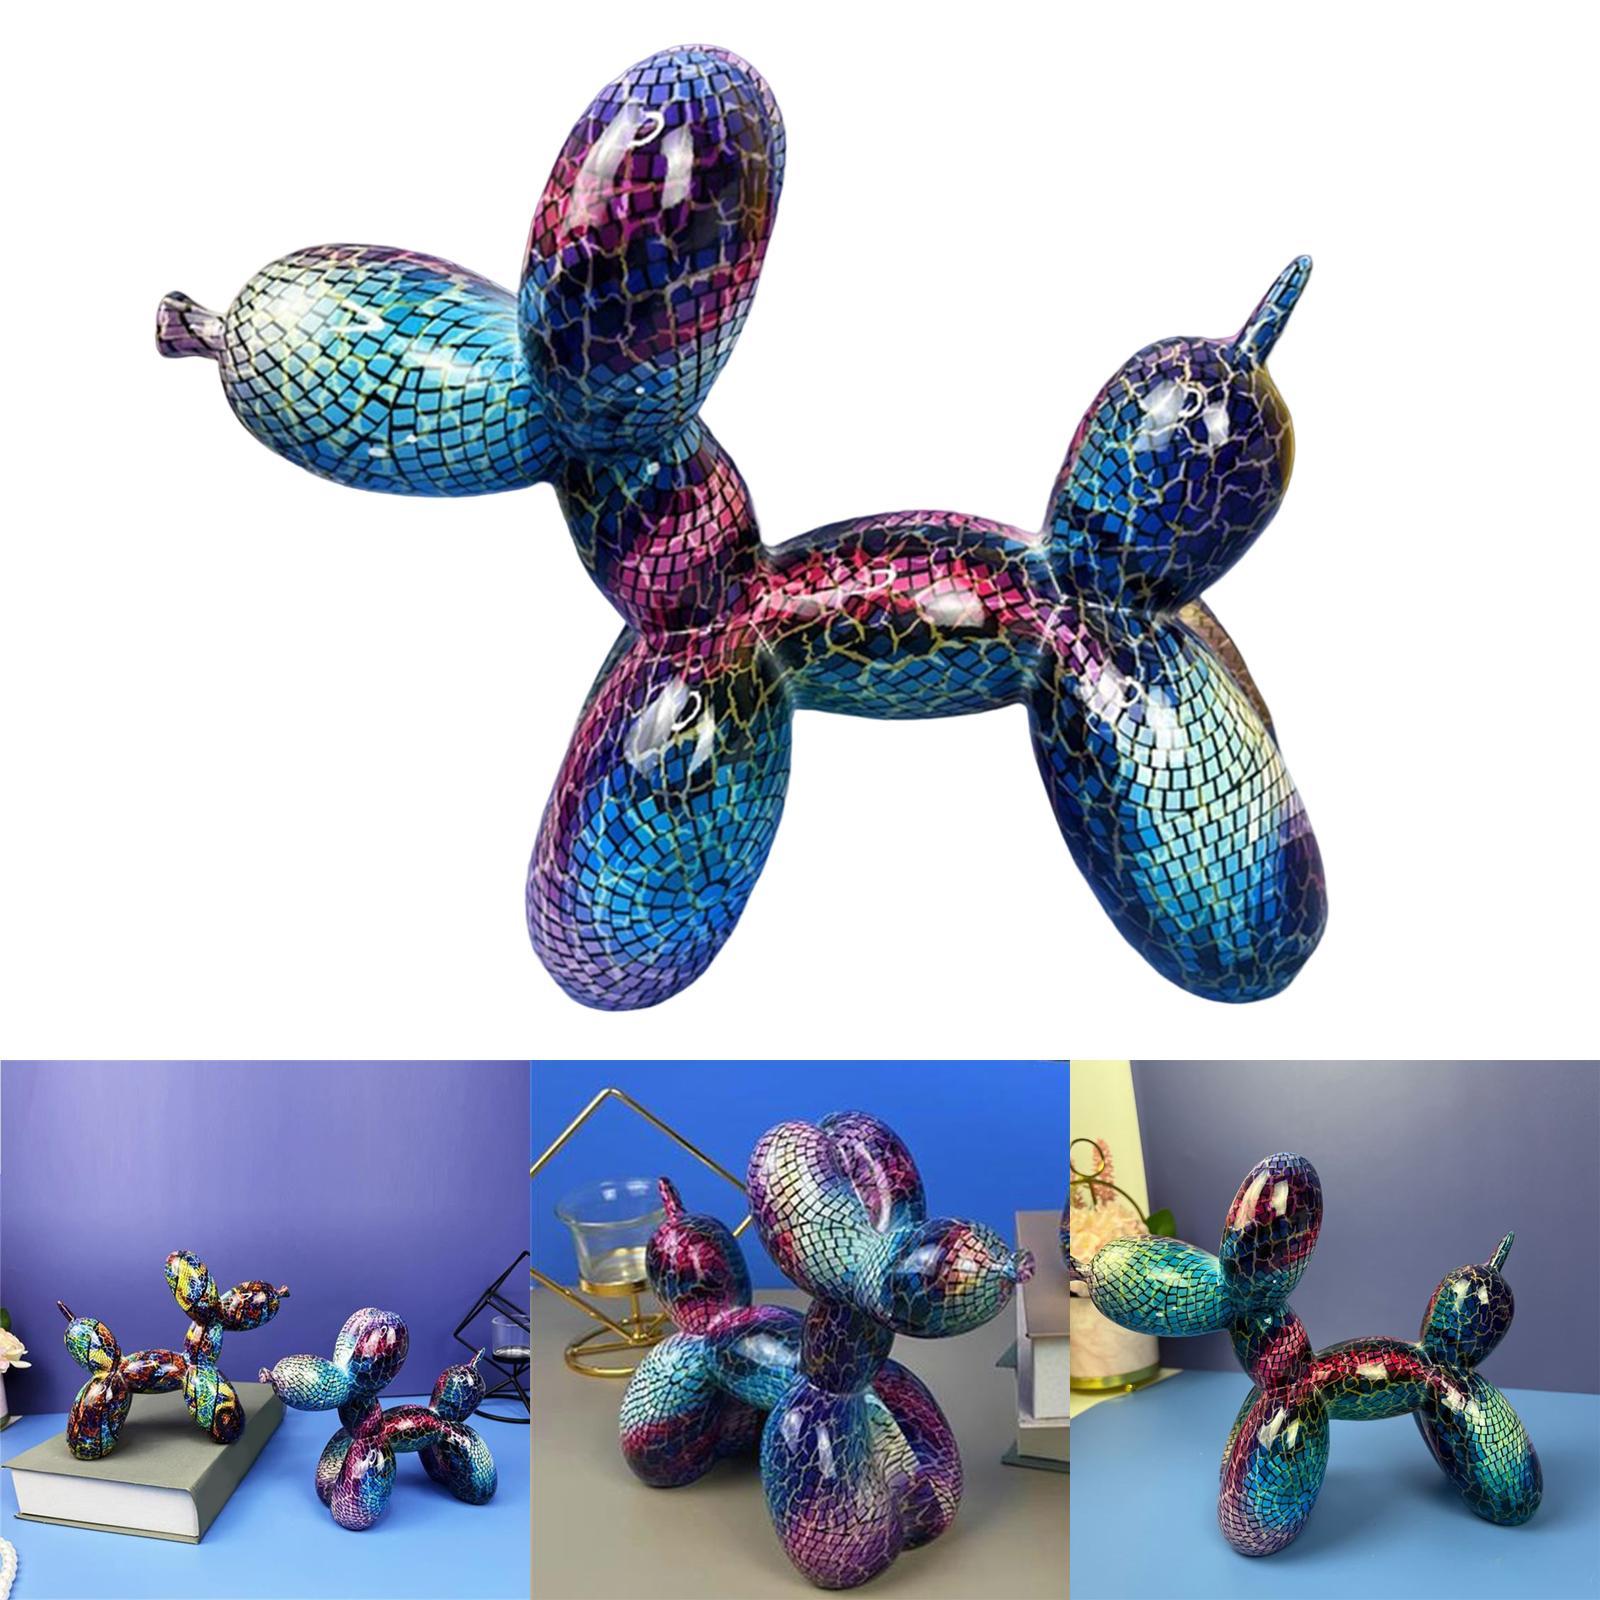 Lovely Balloon Dog Sculptures Animal Figurines for Bedroom Kids Room Home Ornament